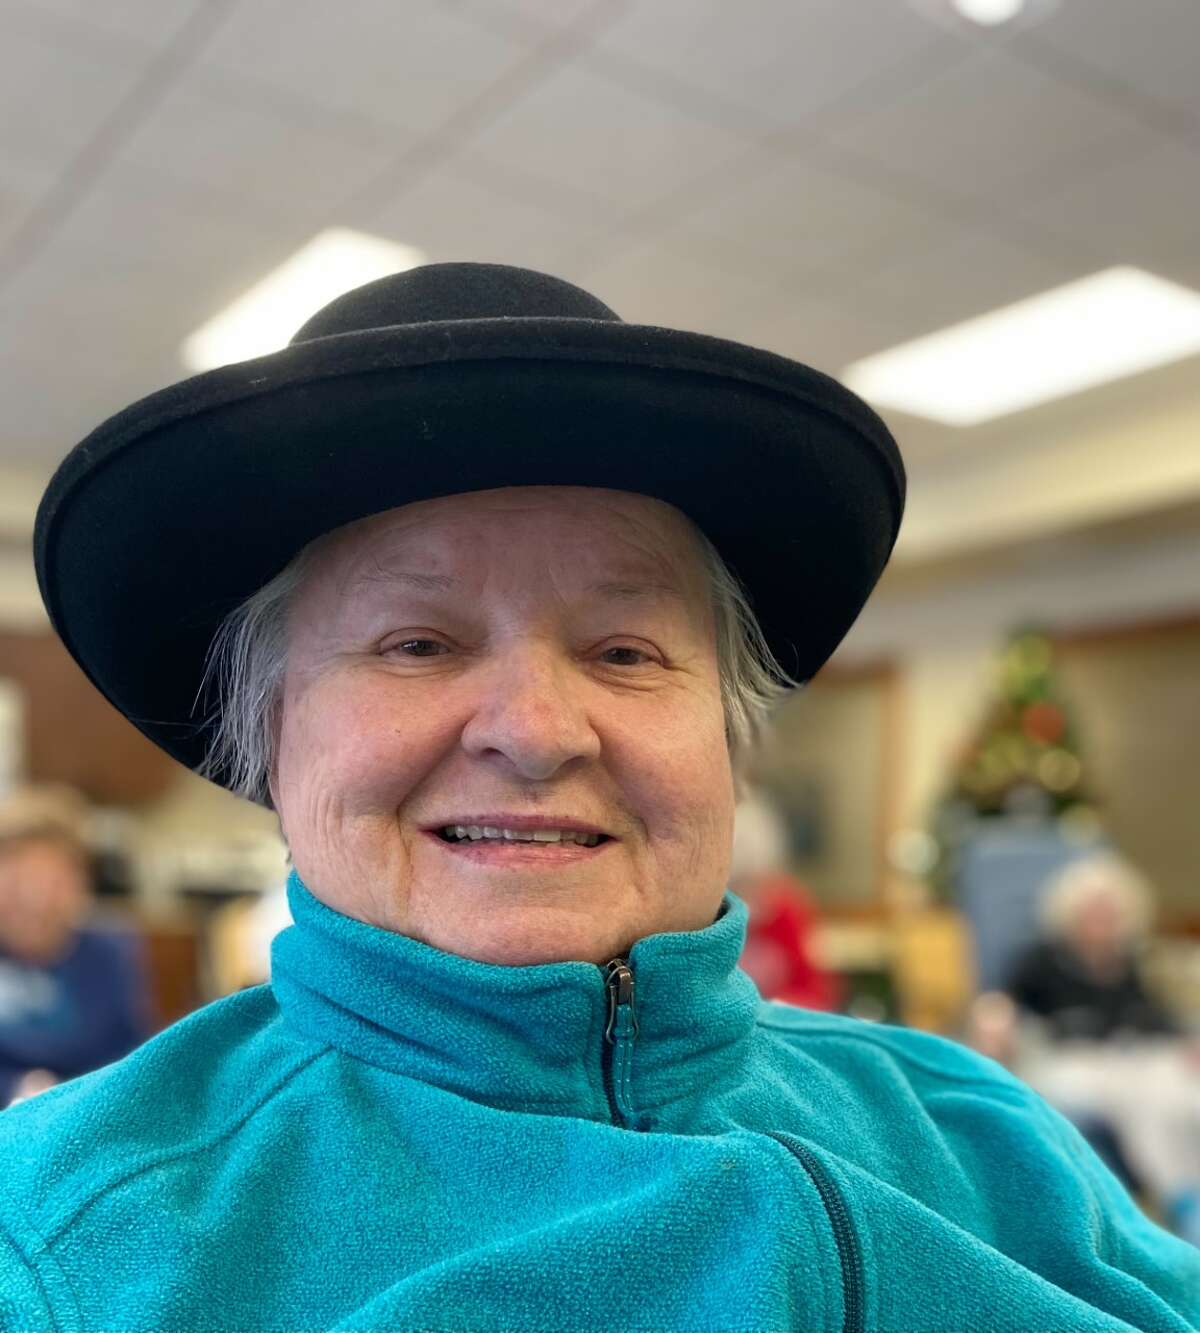 This resident, named Linda, and others at Candlestone Assisted Living recently got a line dancing lesson from Greater Midland Community Center instructor Linda Graf.